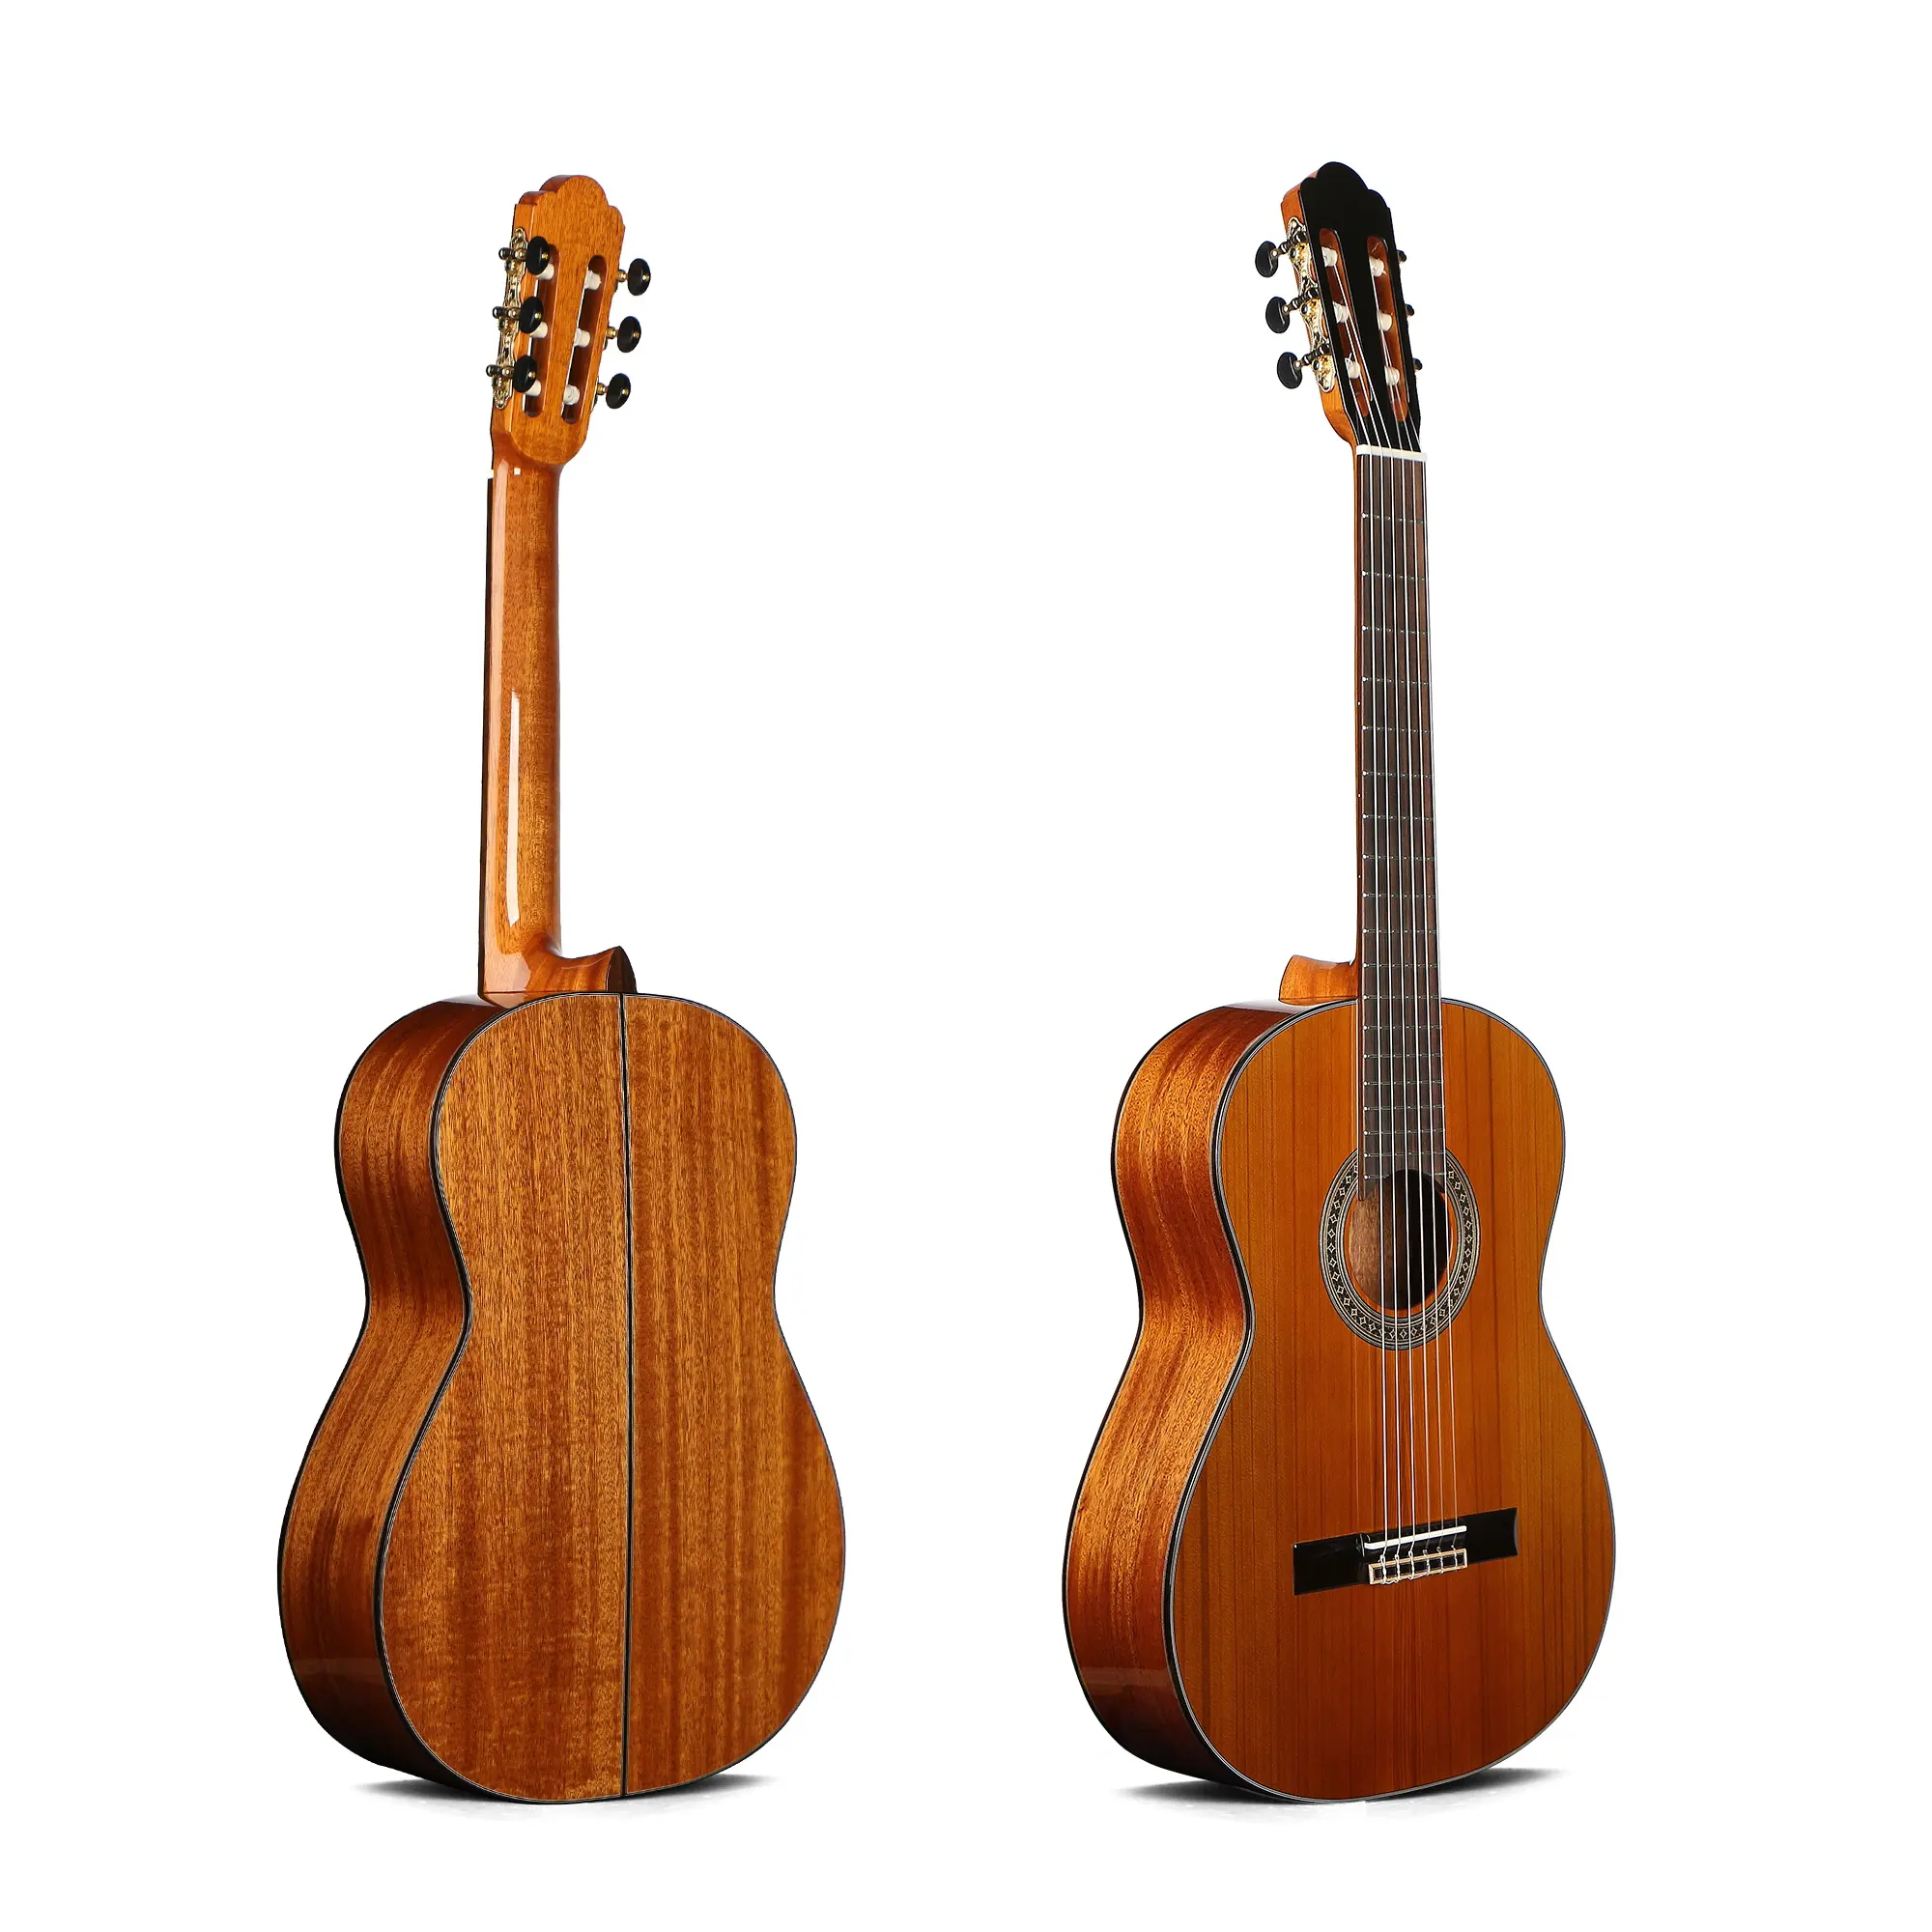 All Solid Ceder Sapele High Quality Classical Guitar 39 Inch Hot Selling Guitar Brand Musical Instruments